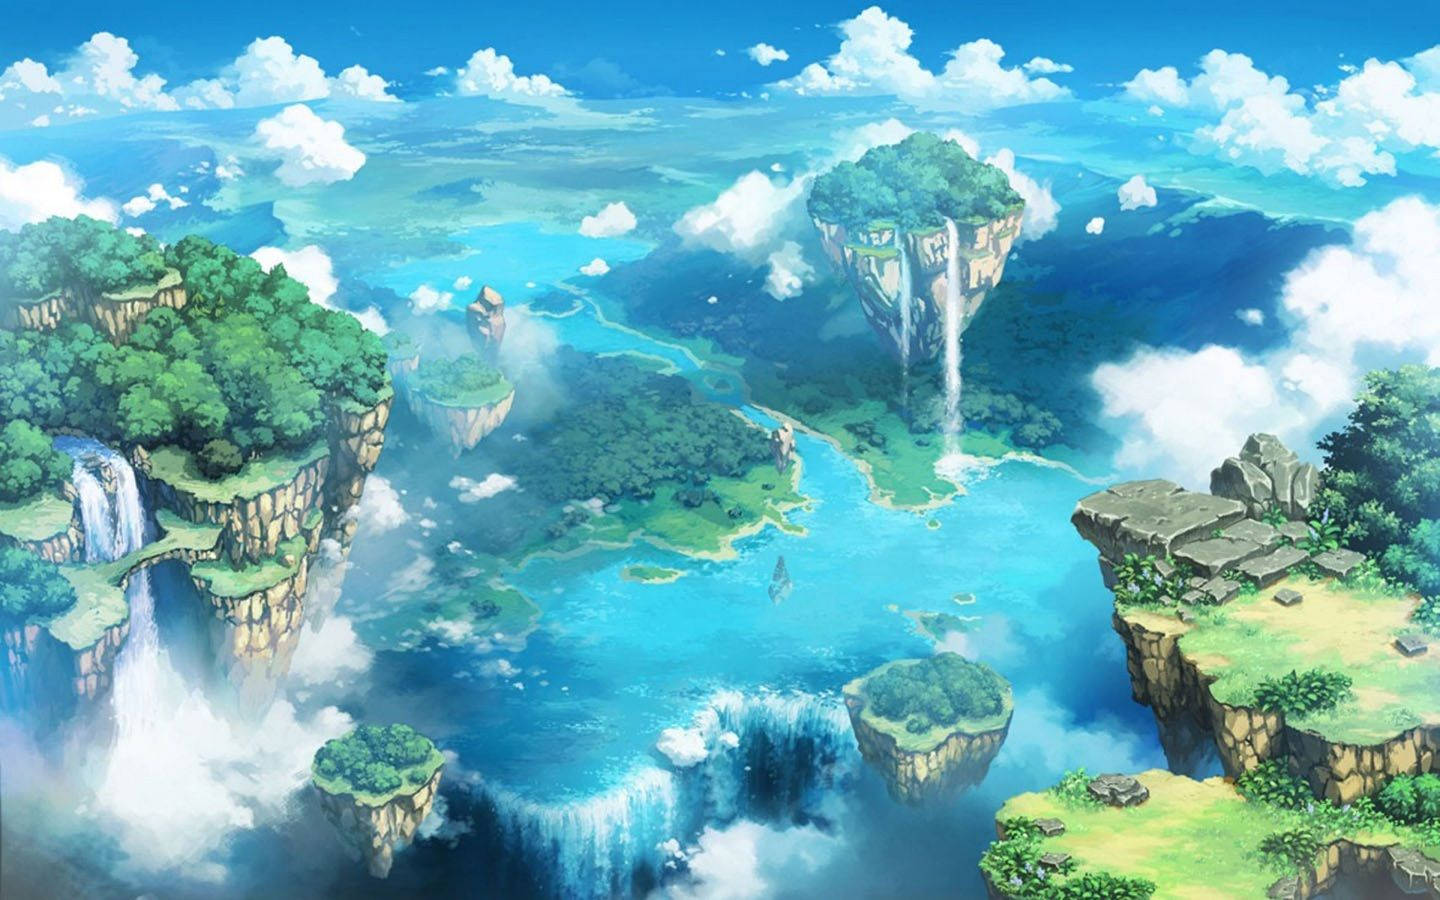 Floating Villages Anime Scenery Wallpaper